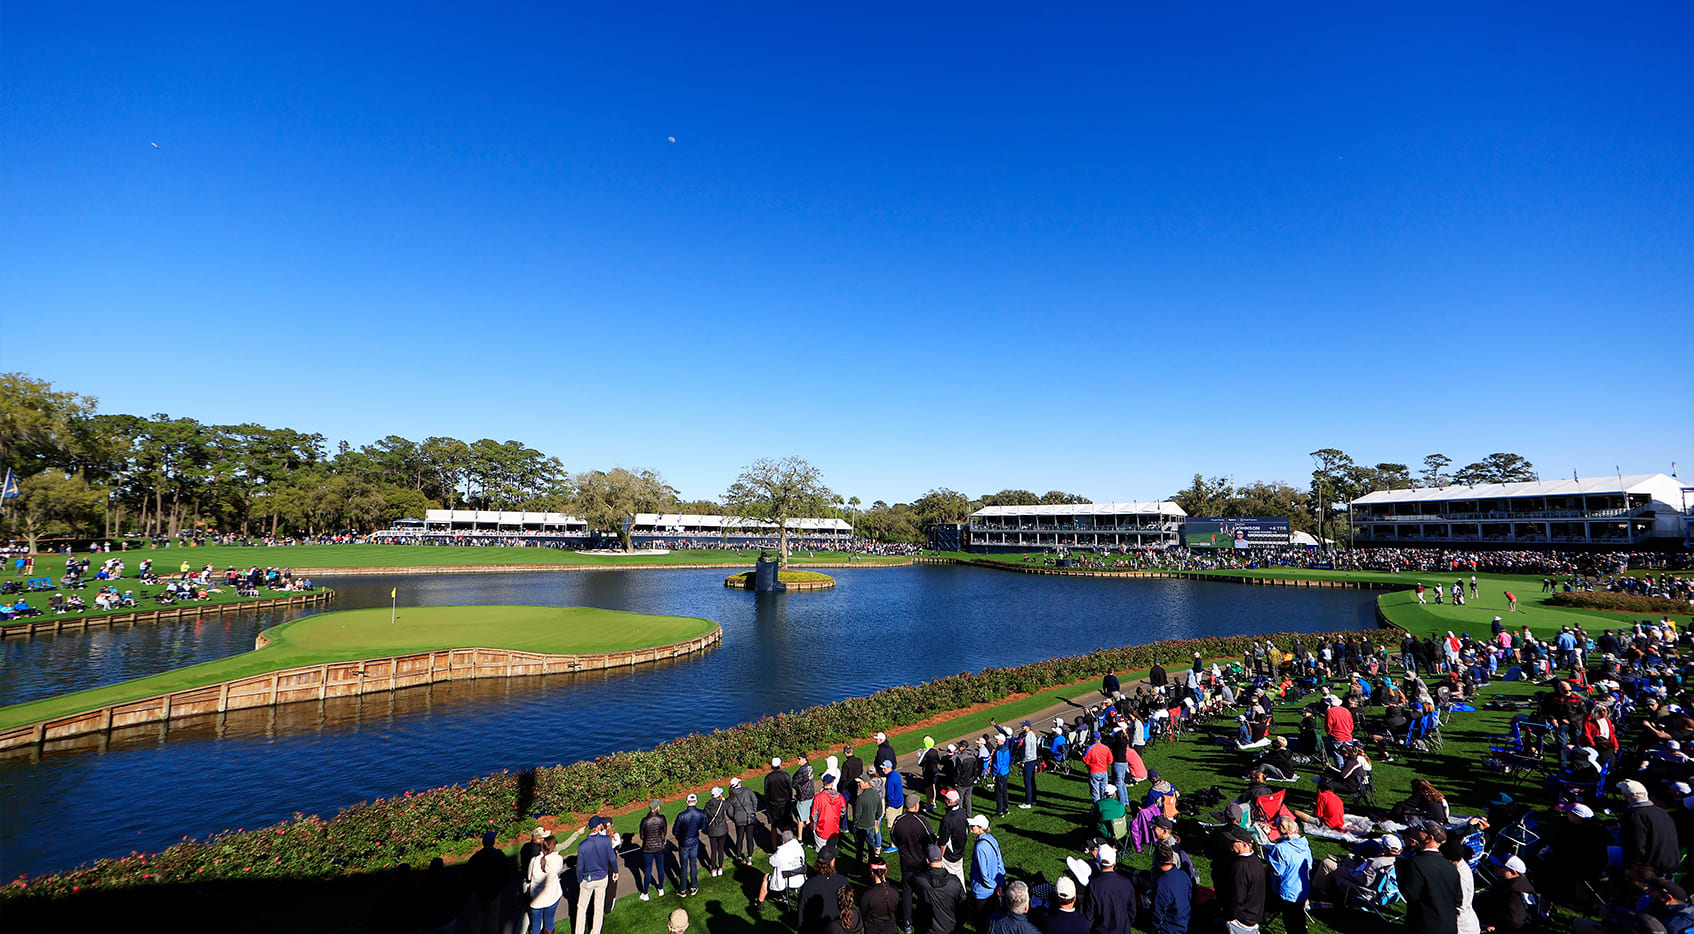 How to watch THE PLAYERS Championship, Monday Featured Groups, live scores, tee times, TV times